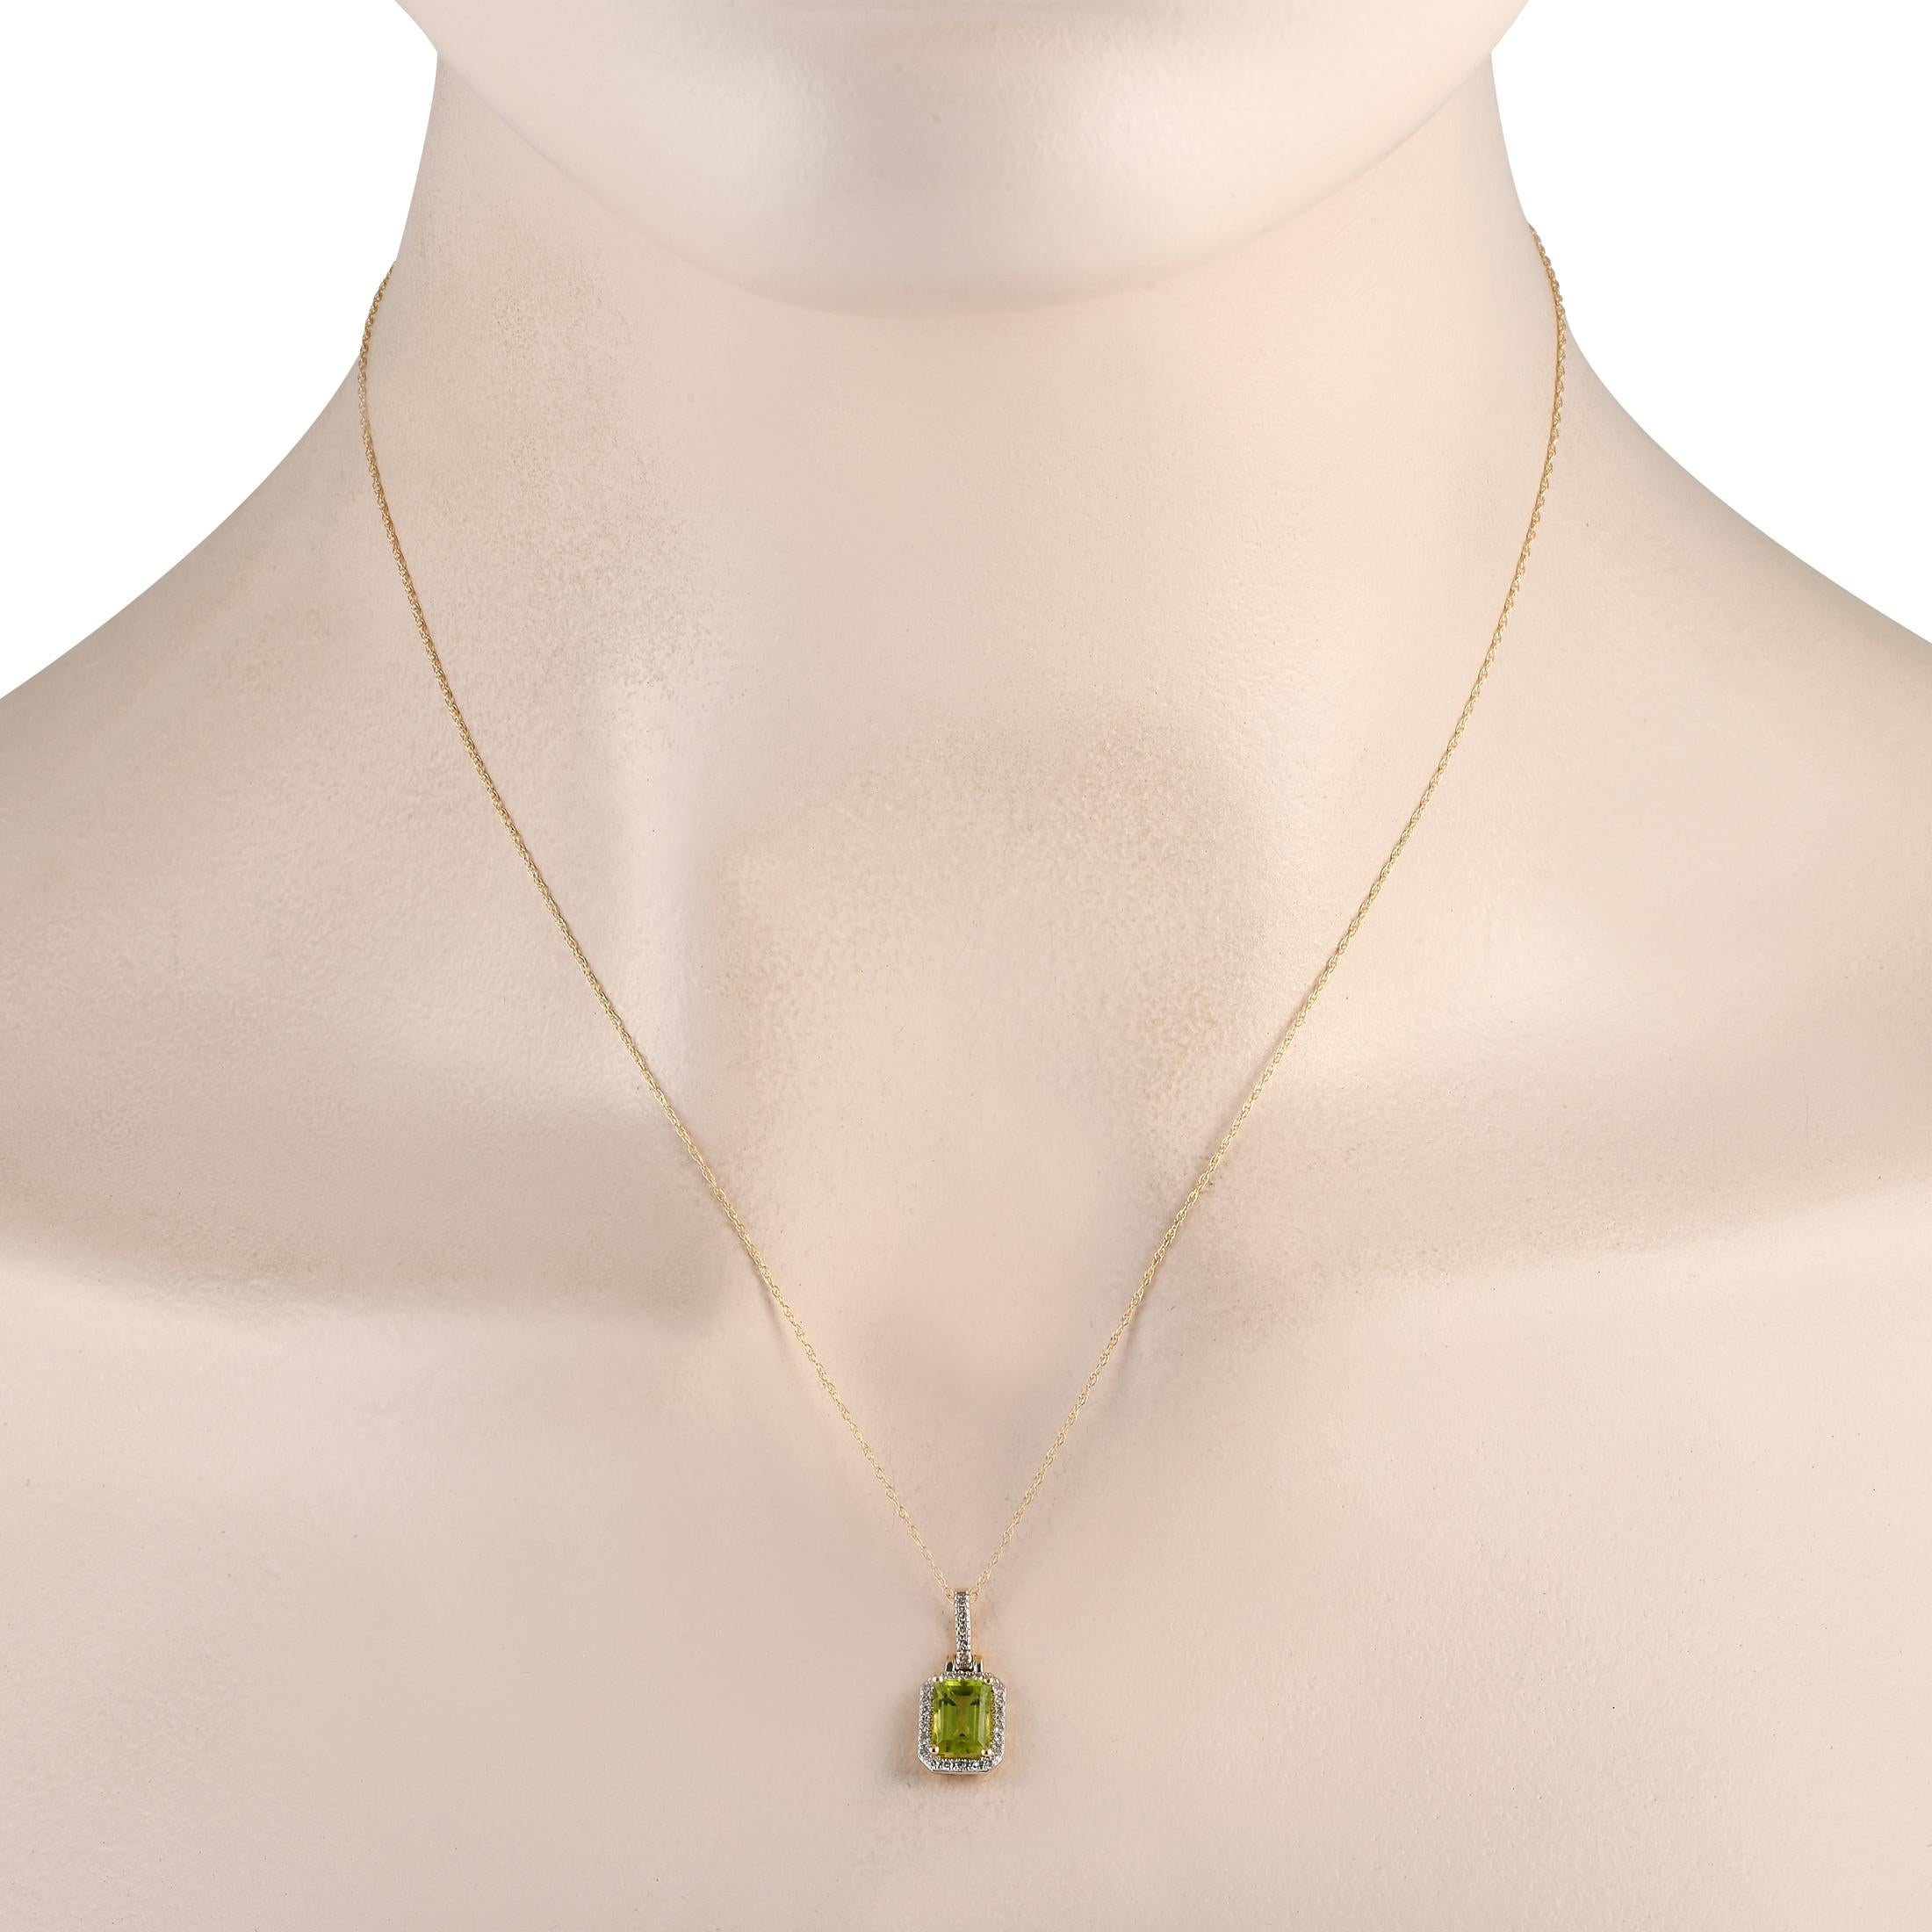 This elegant necklace is sure to impress. Suspended from an 18 chain, youll find an eye-catching 14K Yellow Gold pendant measuring 0.65 long by 0.30 wide. Its elevated by sparkling Diamond accents totaling 0.12 carats and a breathtaking Peridot